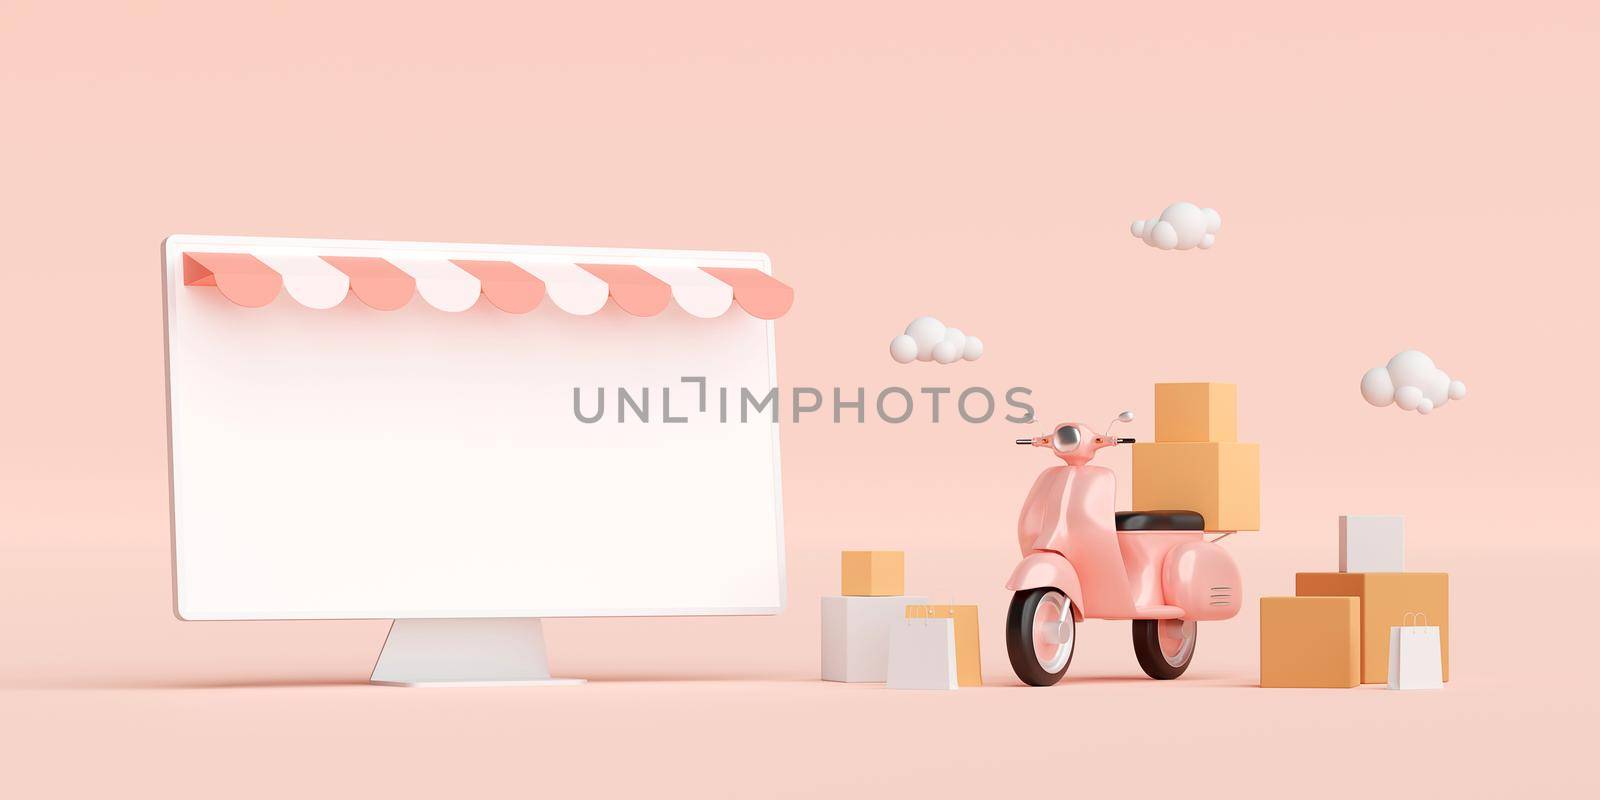 E-commerce concept, Shopping and delivery service online, Transportation or food delivery by scooter, 3d illustration by nutzchotwarut